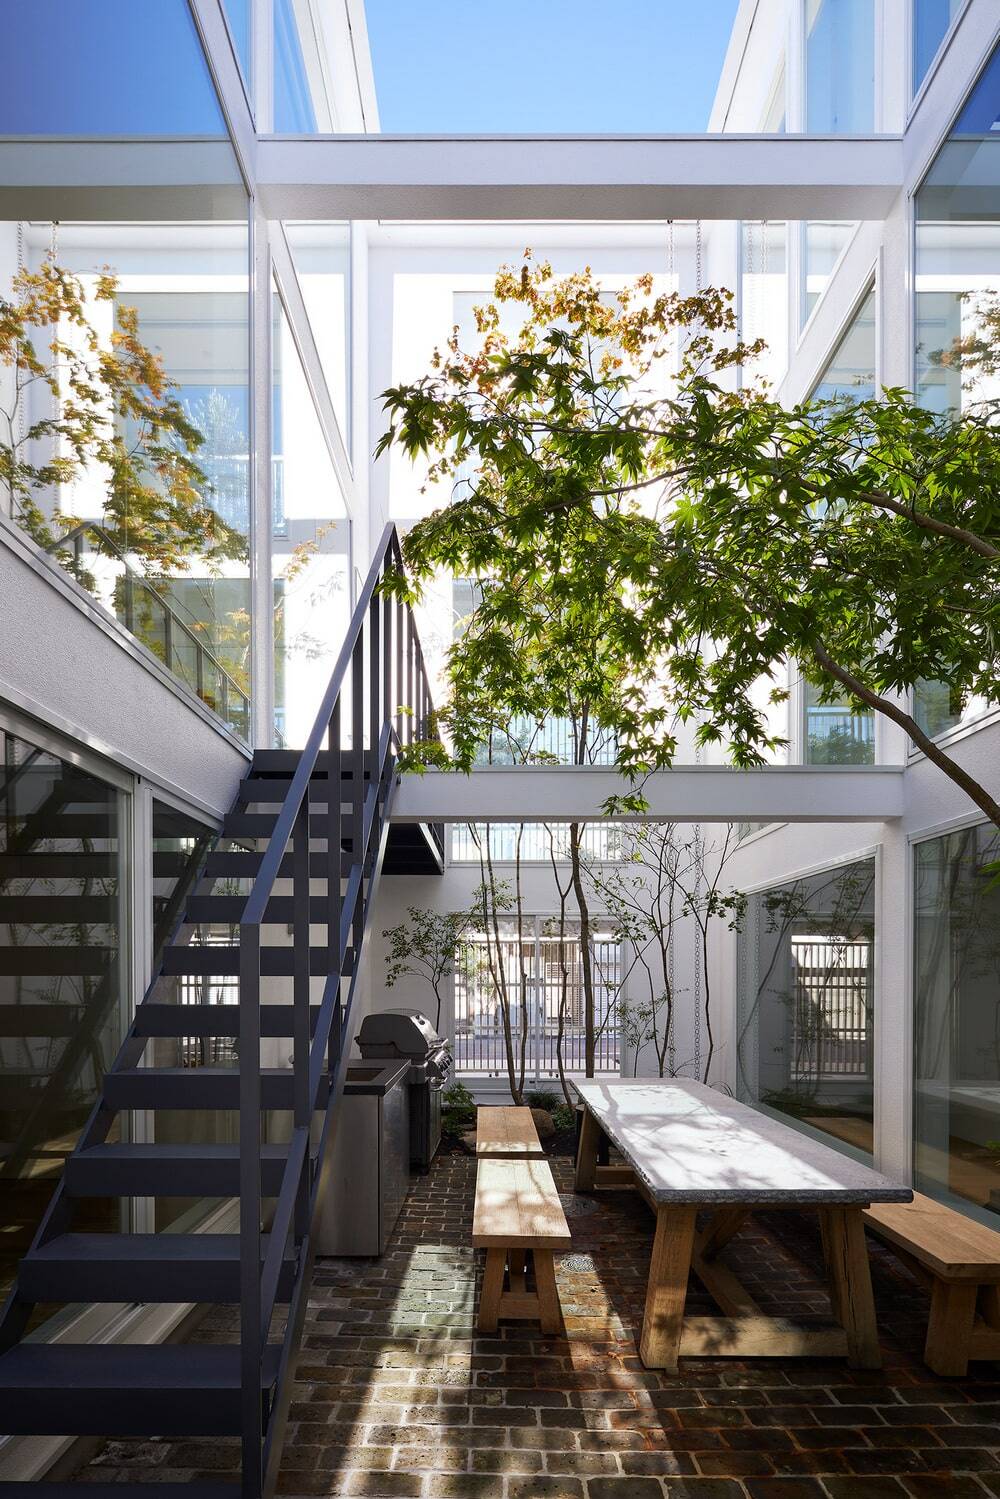 House Connected by Courtyard by Naf Architect & Design